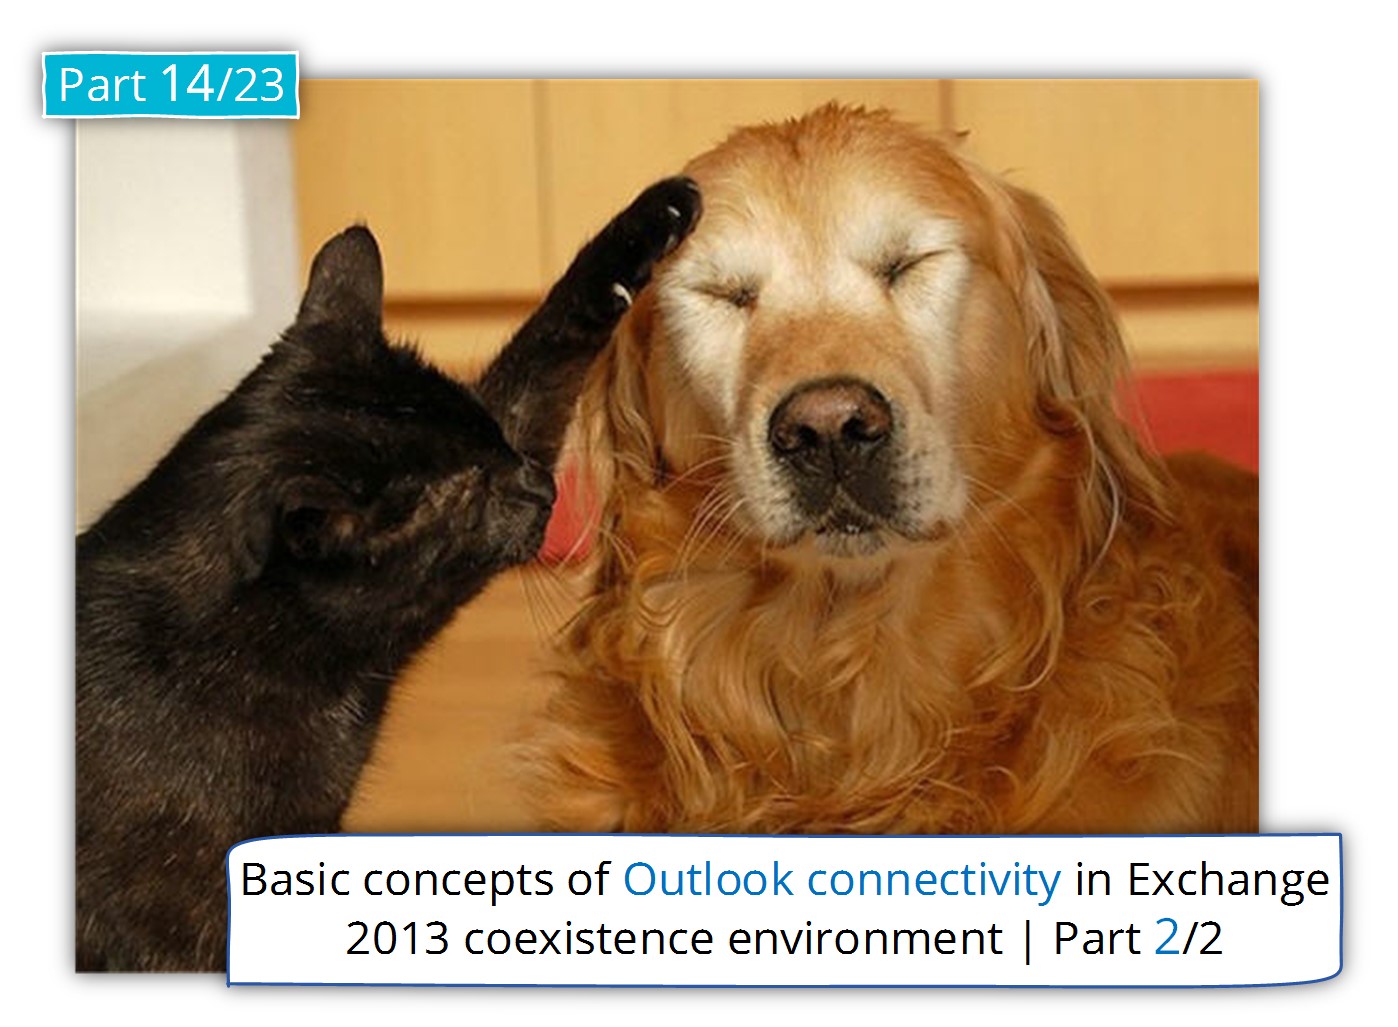 Exchange 2013 coexistence environment and Outlook infrastructure | Part 2/2 